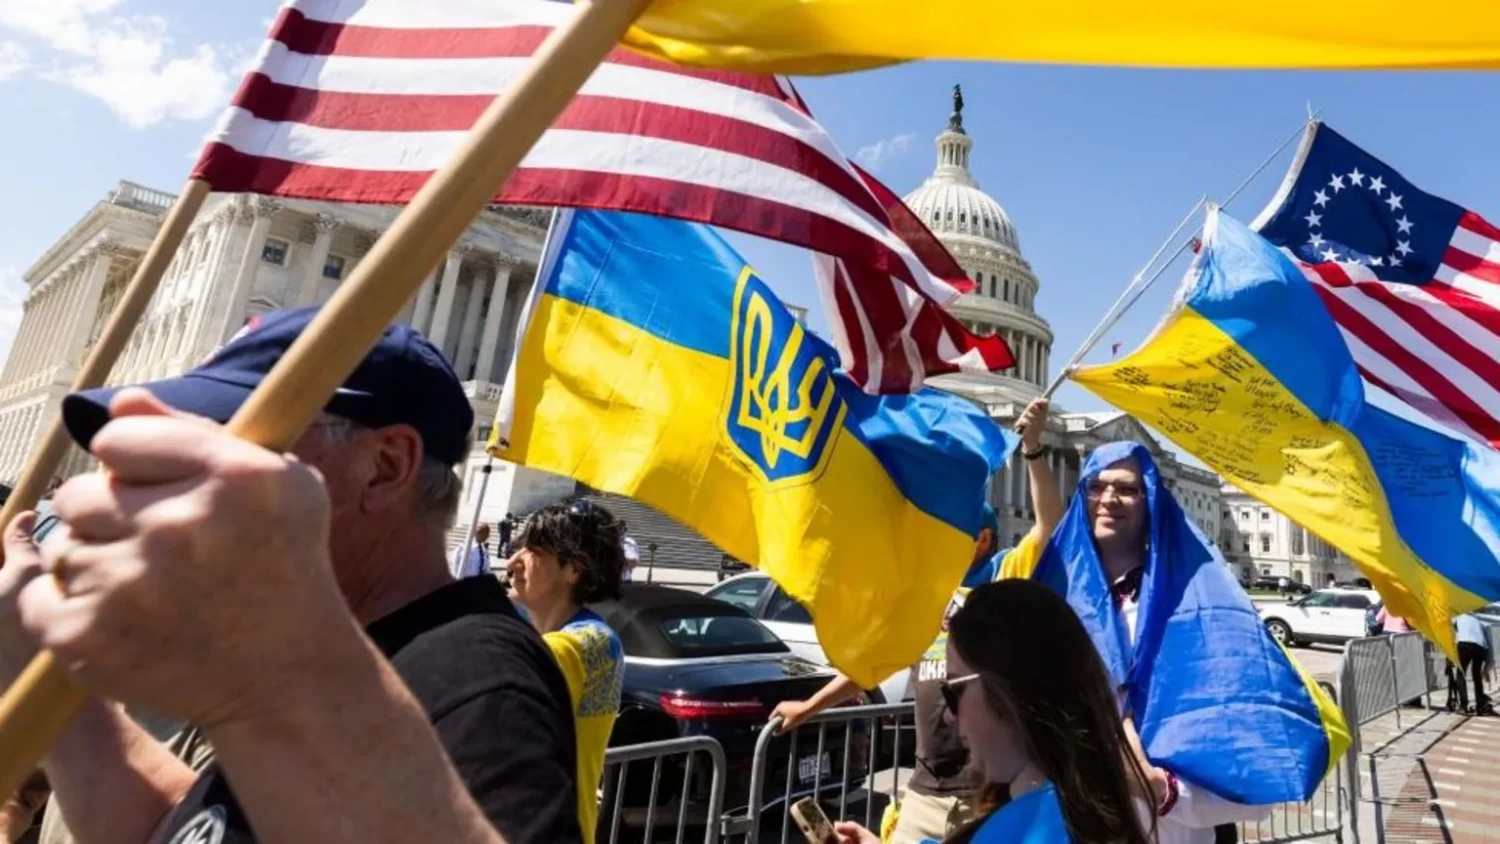 Congress clears $95bn aid package for Ukraine and Israel